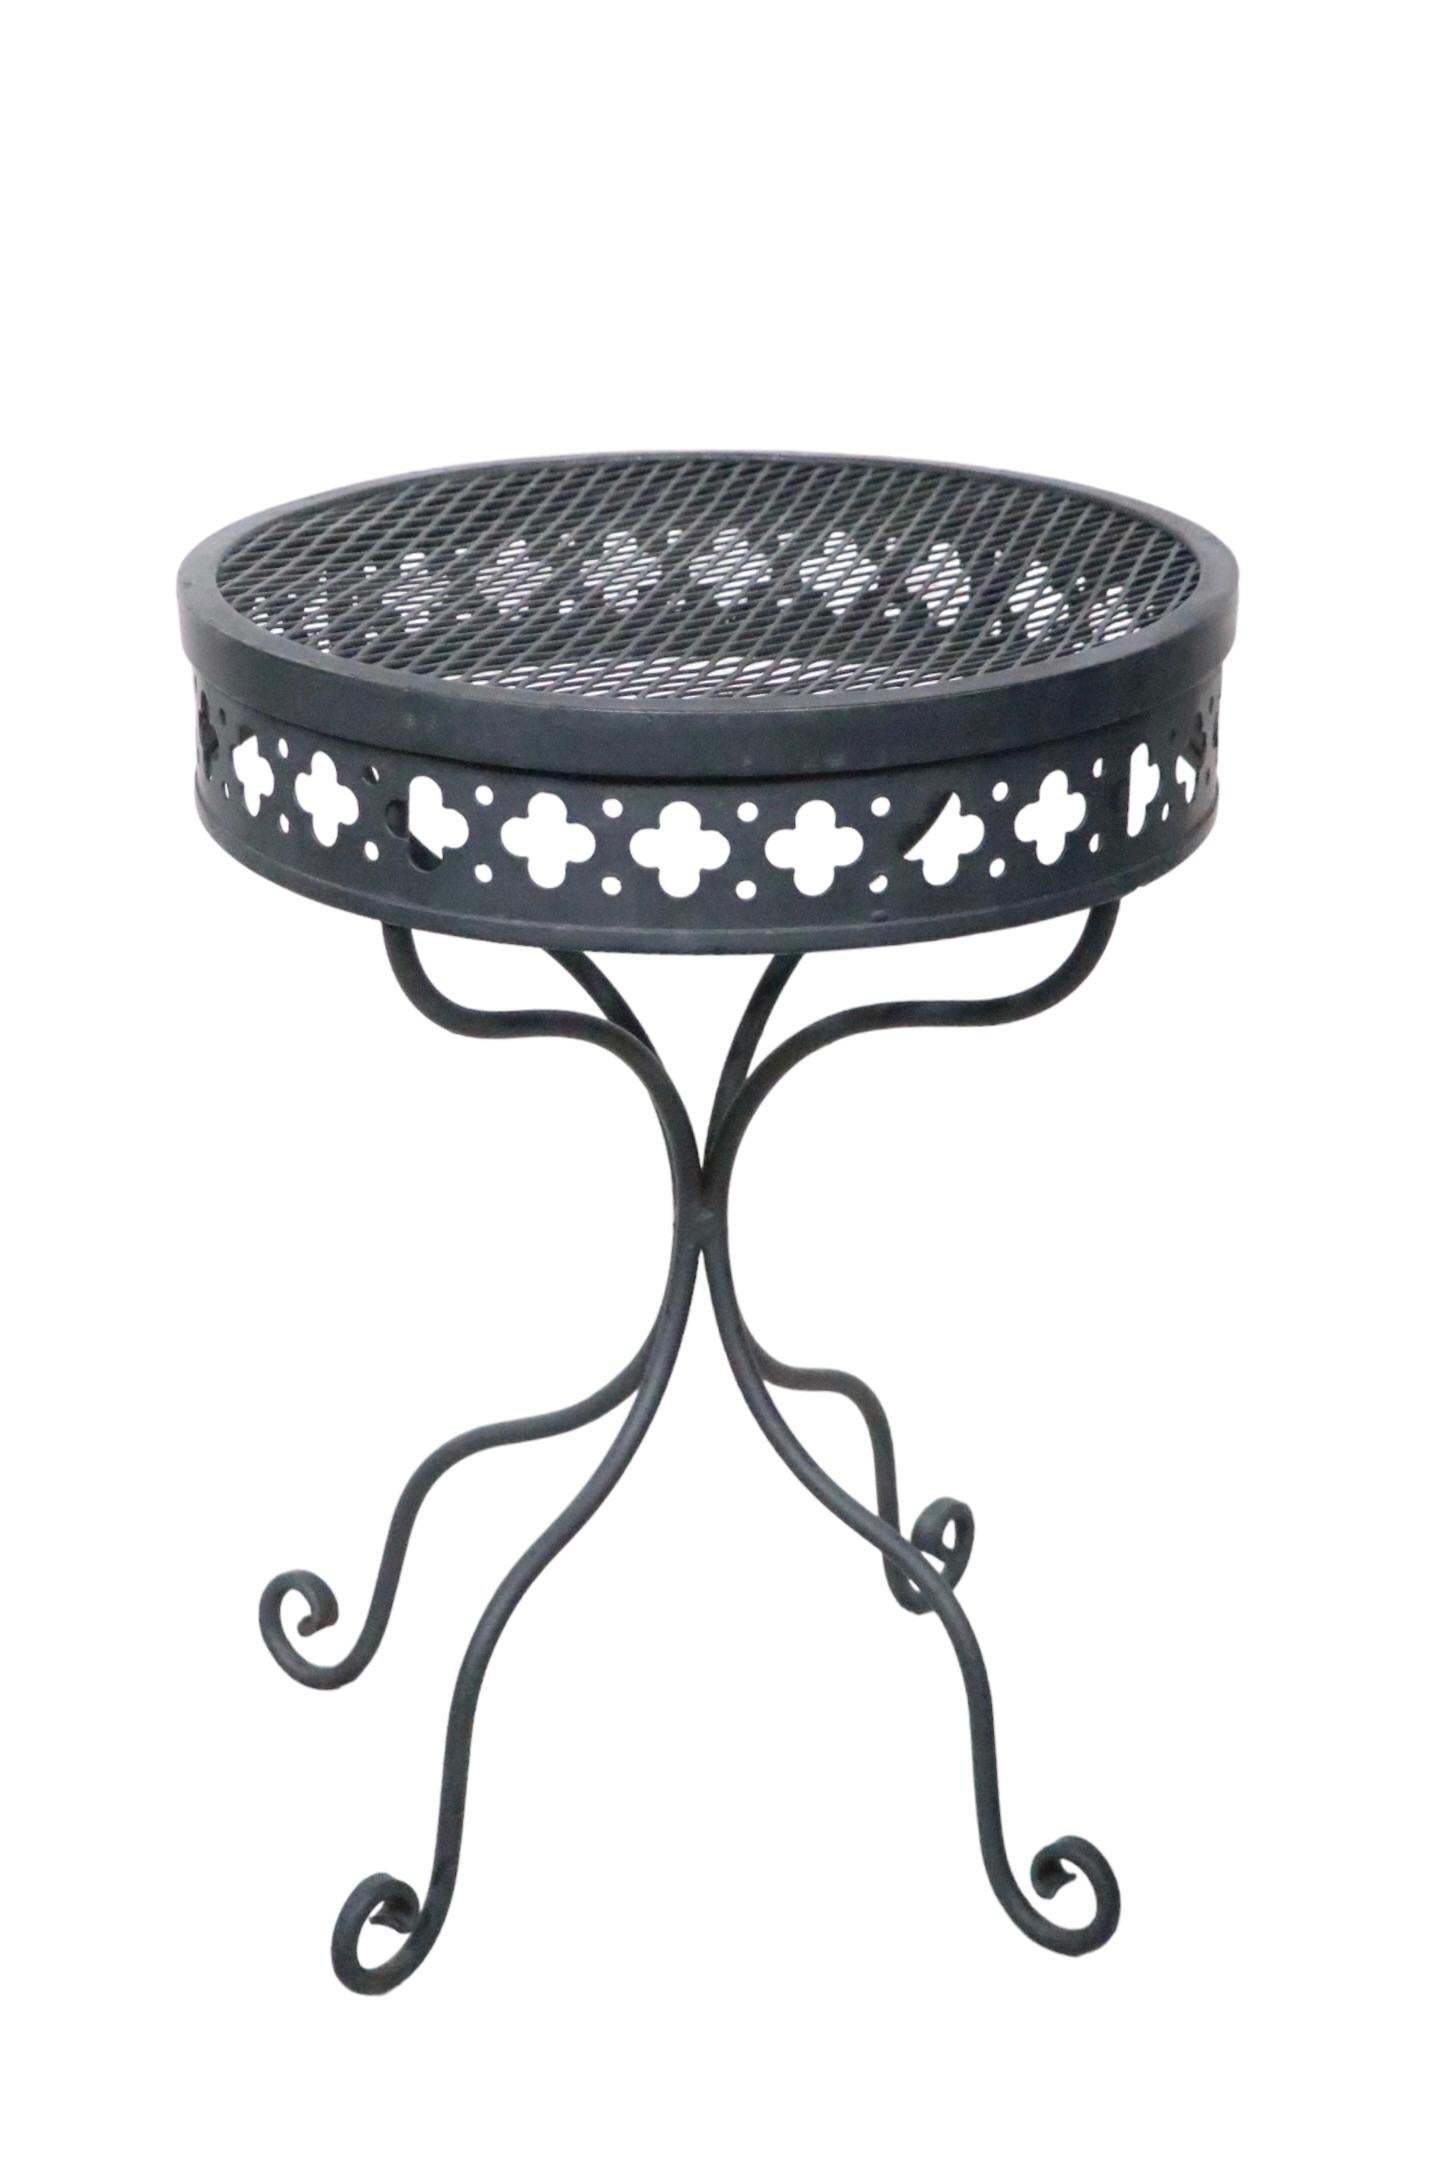 Wrought Iron and Metal Mesh Garden Patio Side End Table Taj Mahal by Salterini For Sale 4